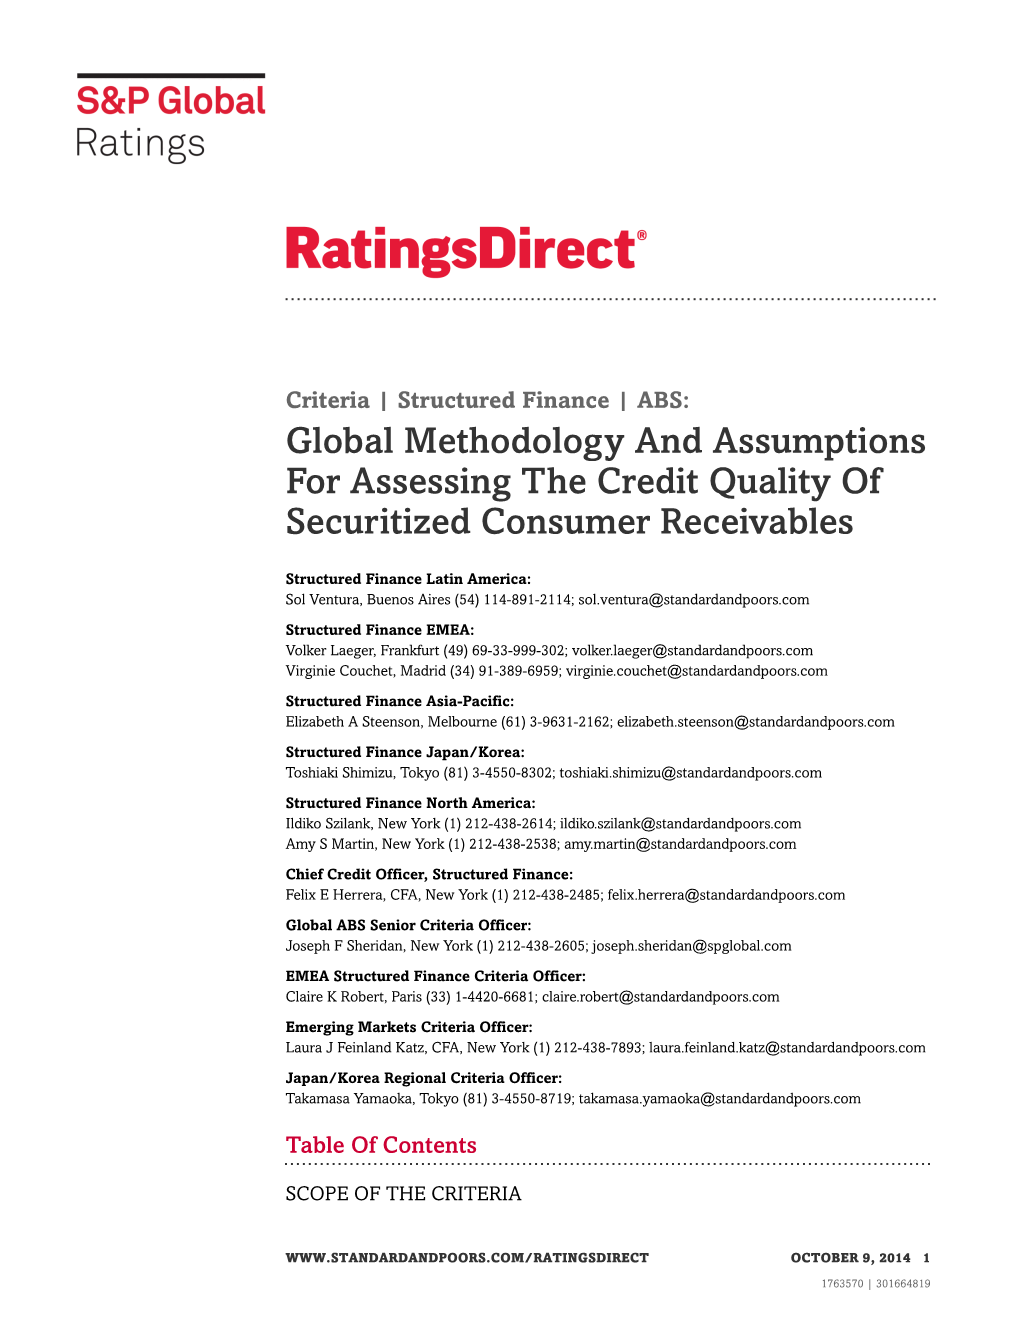 Global Methodology and Assumptions for Assessing the Credit Quality of Securitized Consumer Receivables